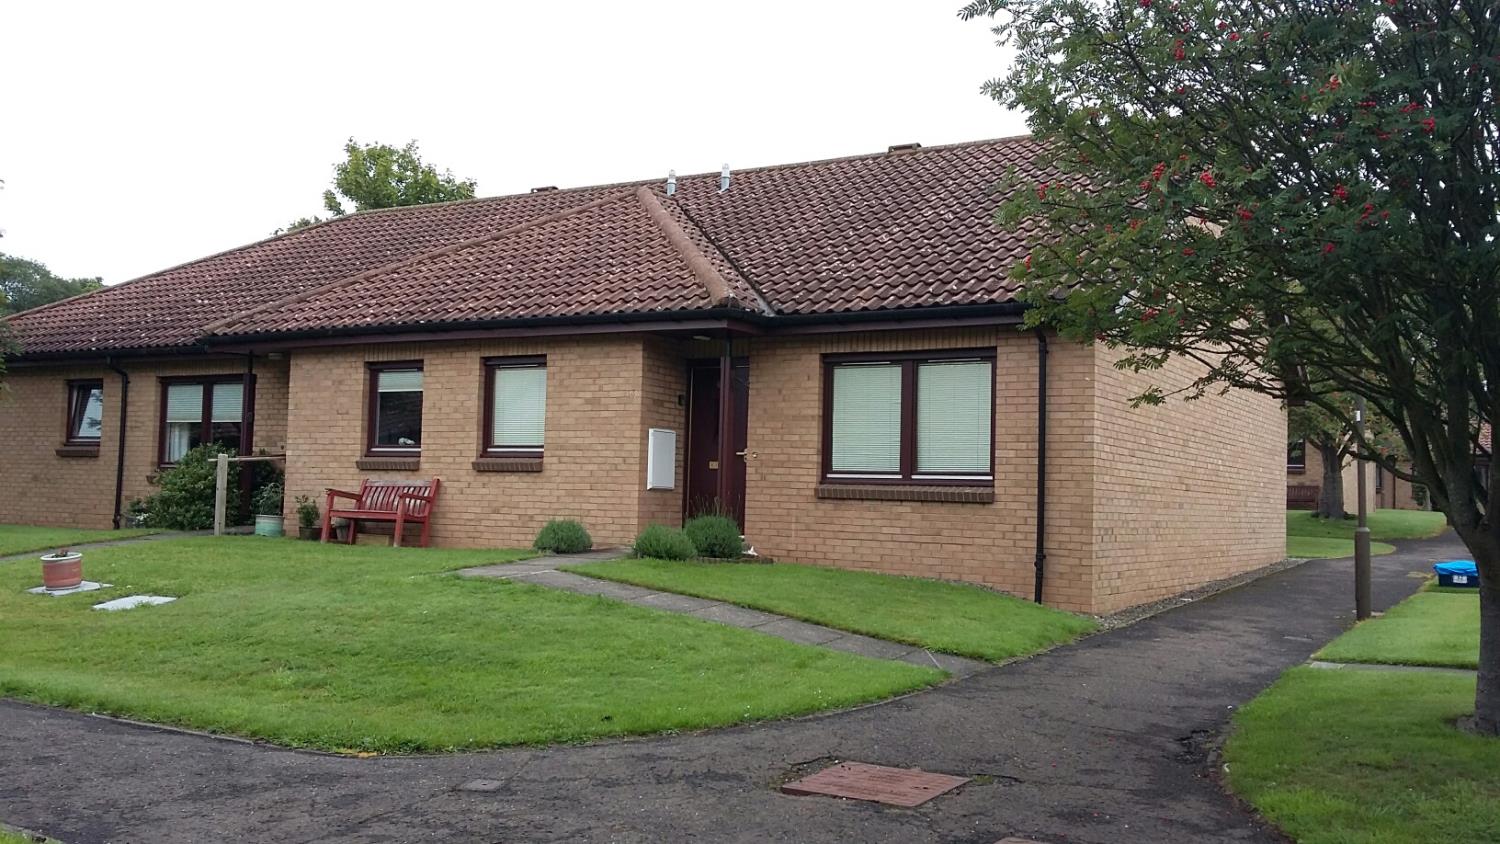 View property for rent Muirfield House, Gullane